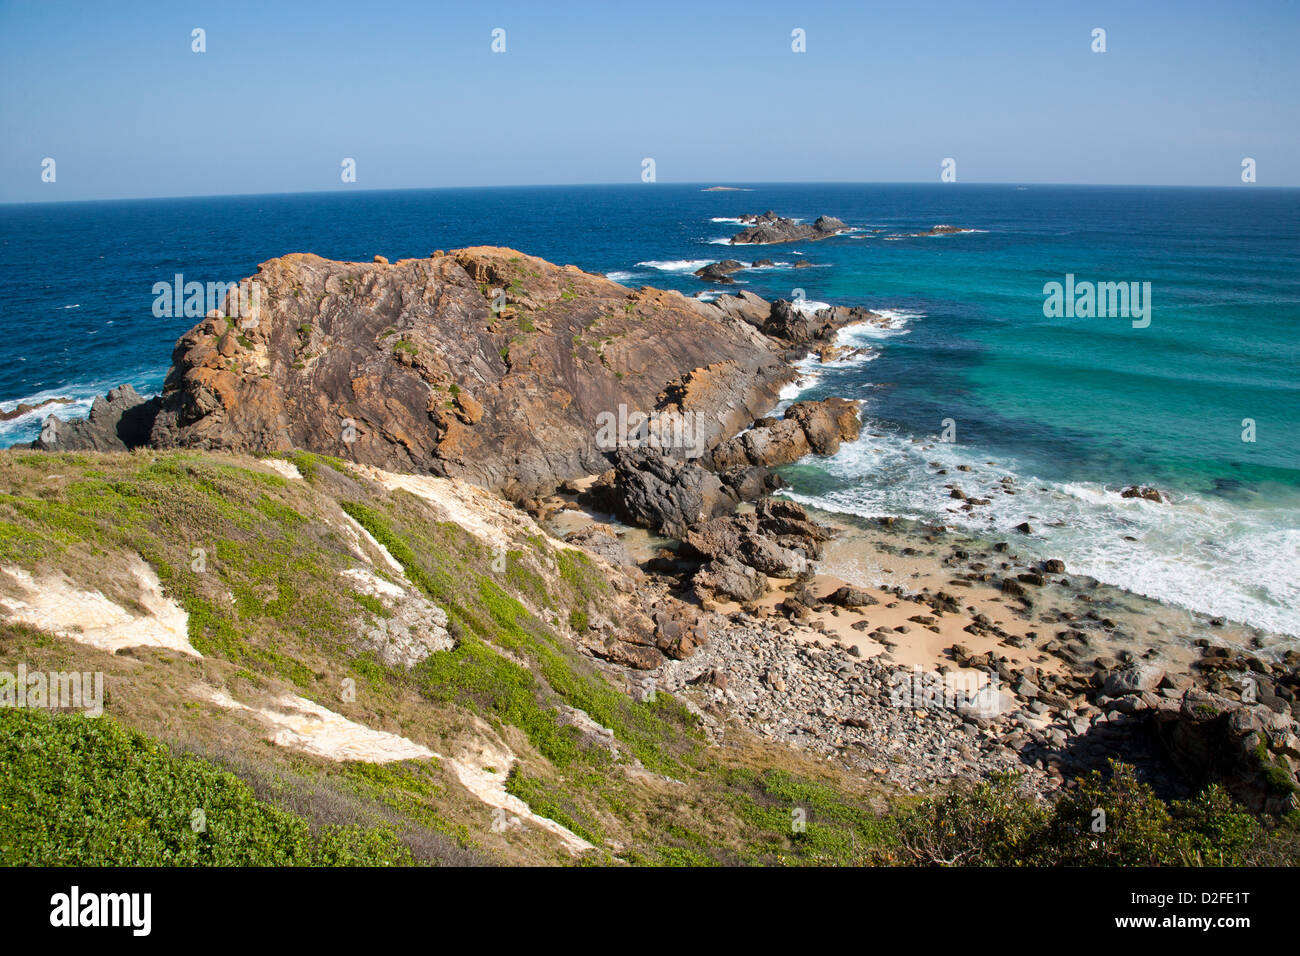 Seal Rocks, inferiore North Coast NSW, area dei Grandi Laghi, Myall Lakes National Park, paesaggi costieri a Sugarloaf Point Lighthouse Foto Stock